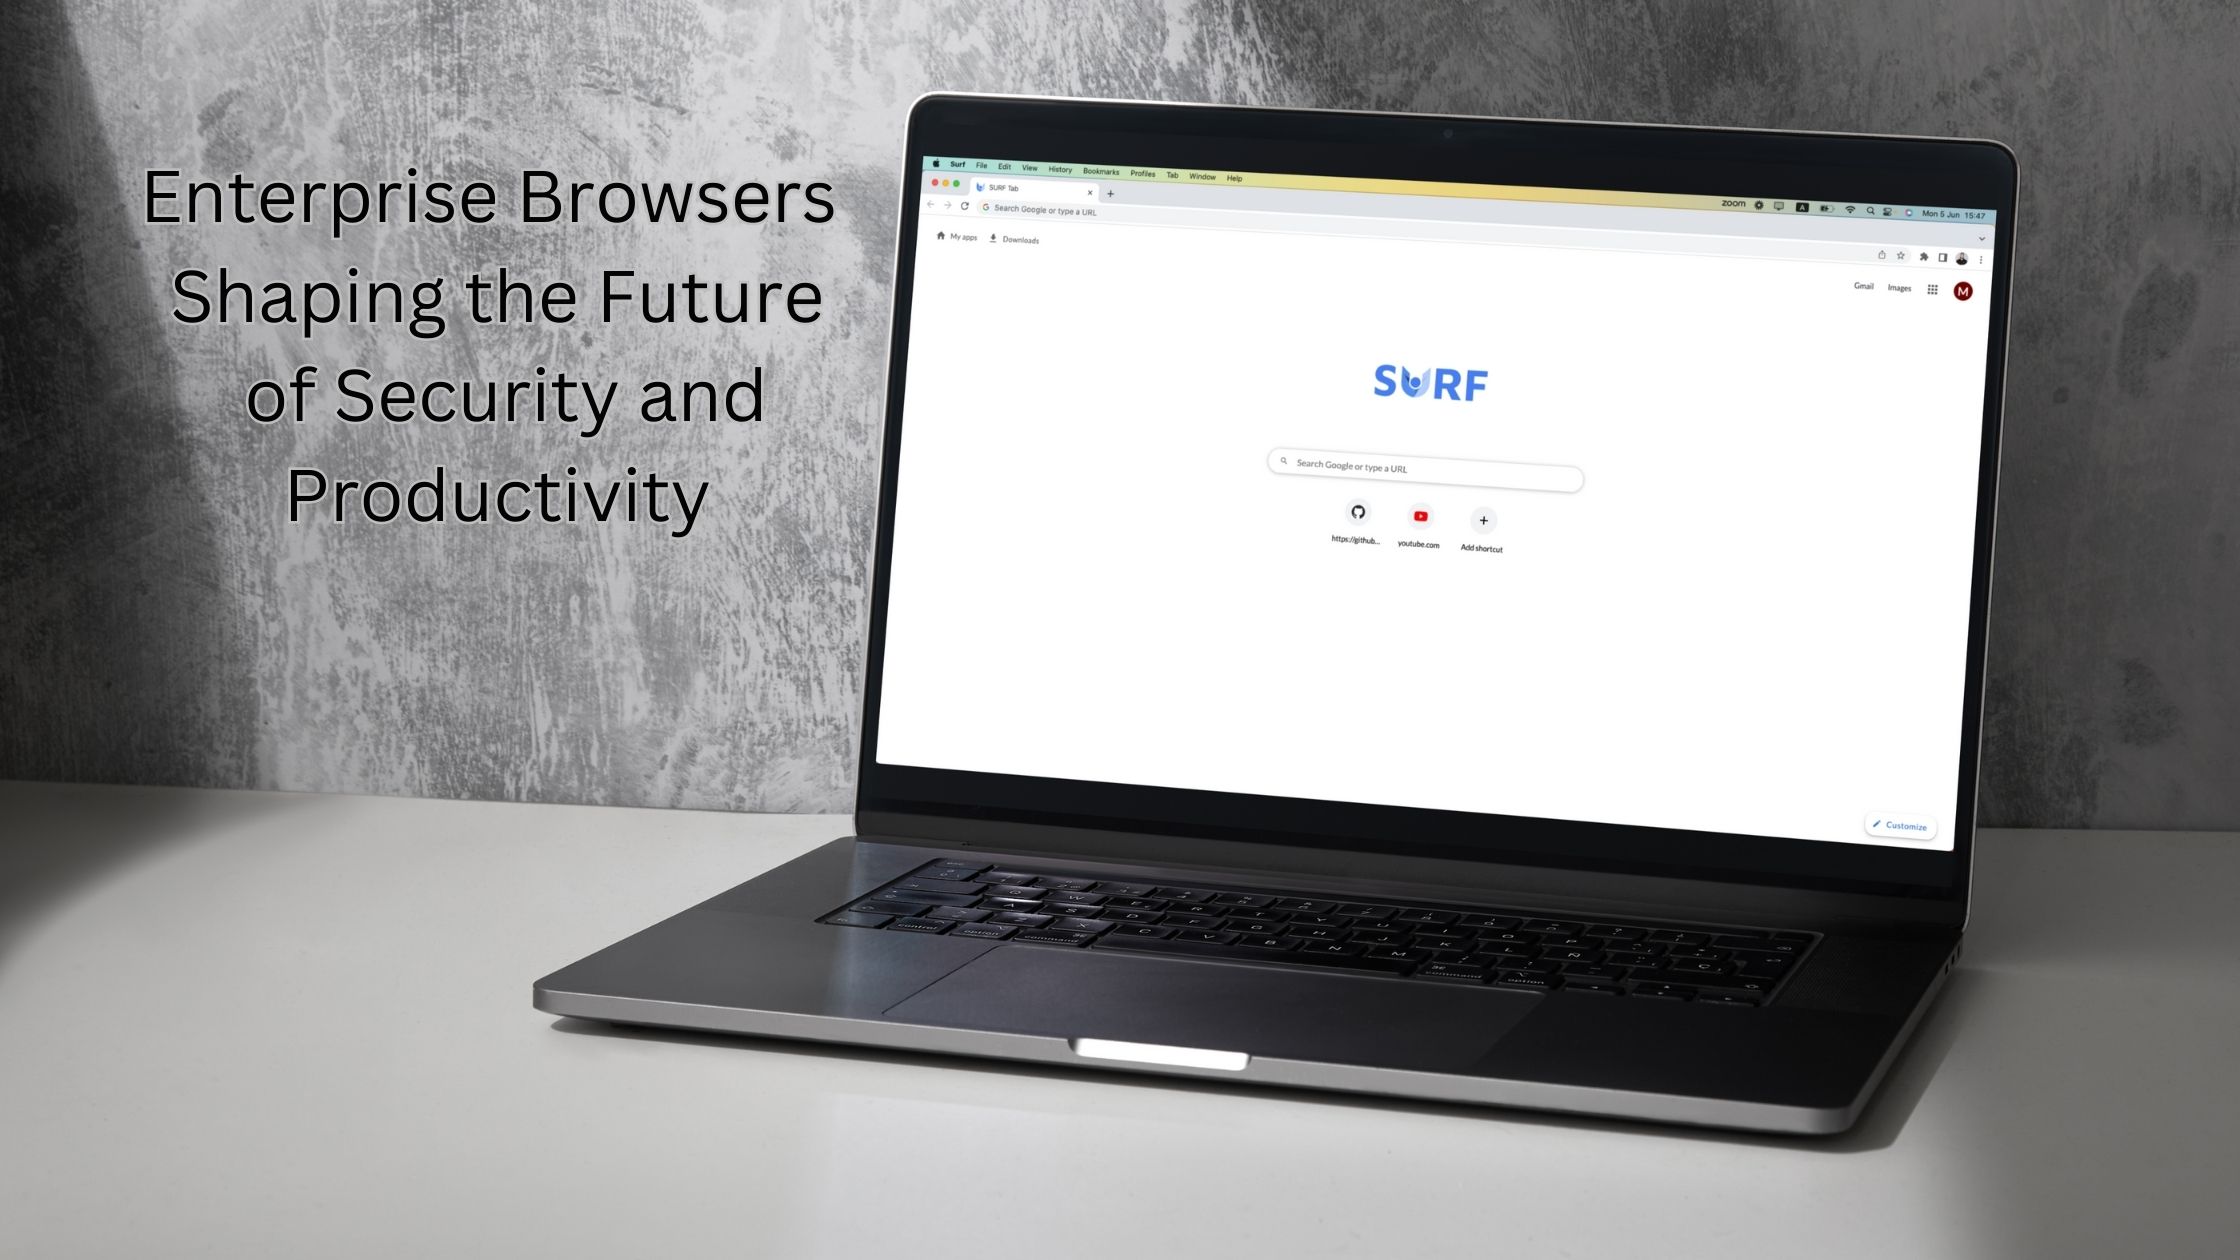 Enterprise Browsers Shaping the Future of Security and Productivity